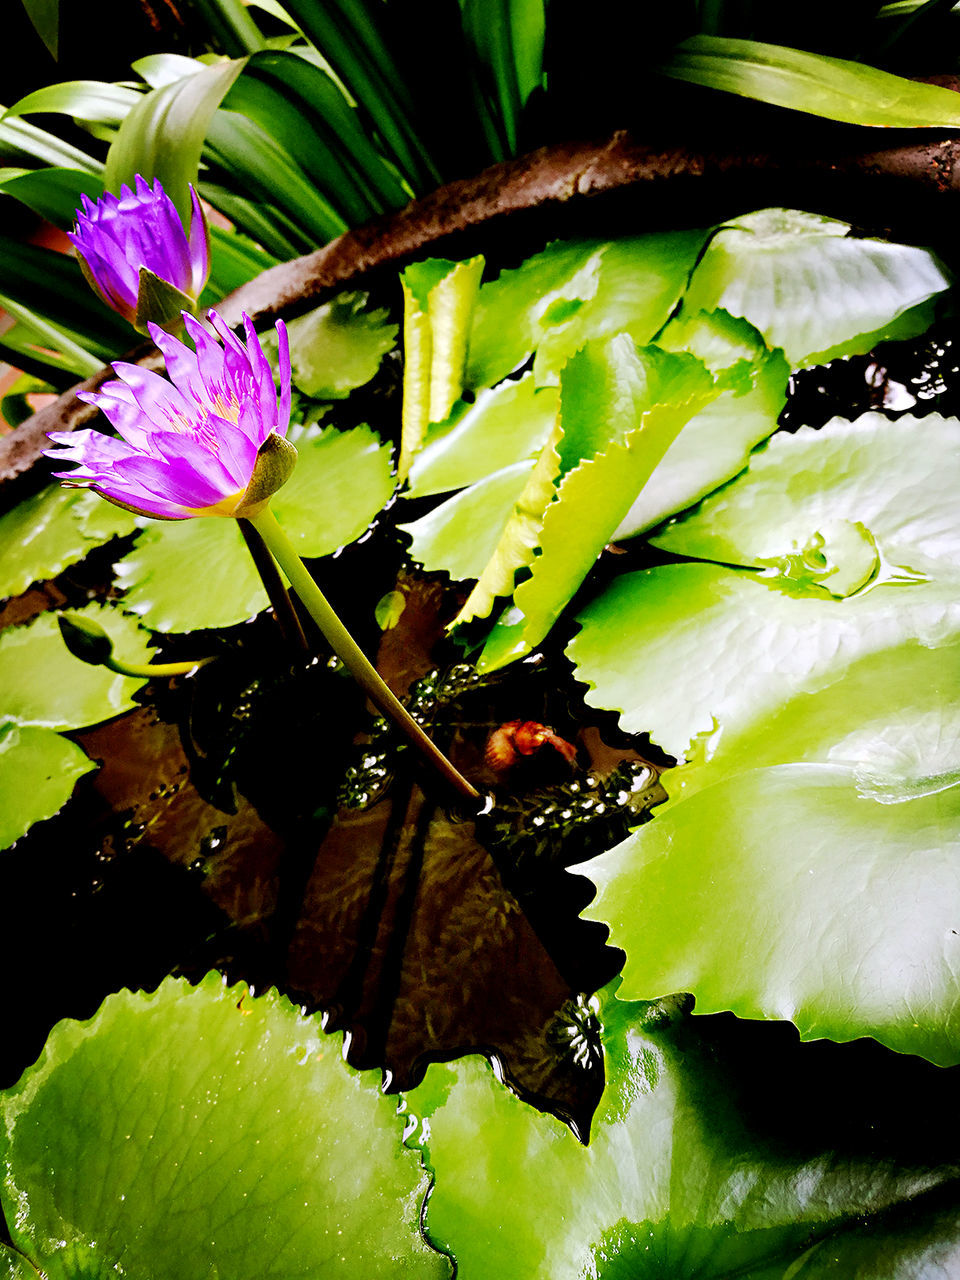 CLOSE-UP OF WATER LILY ON PLANT